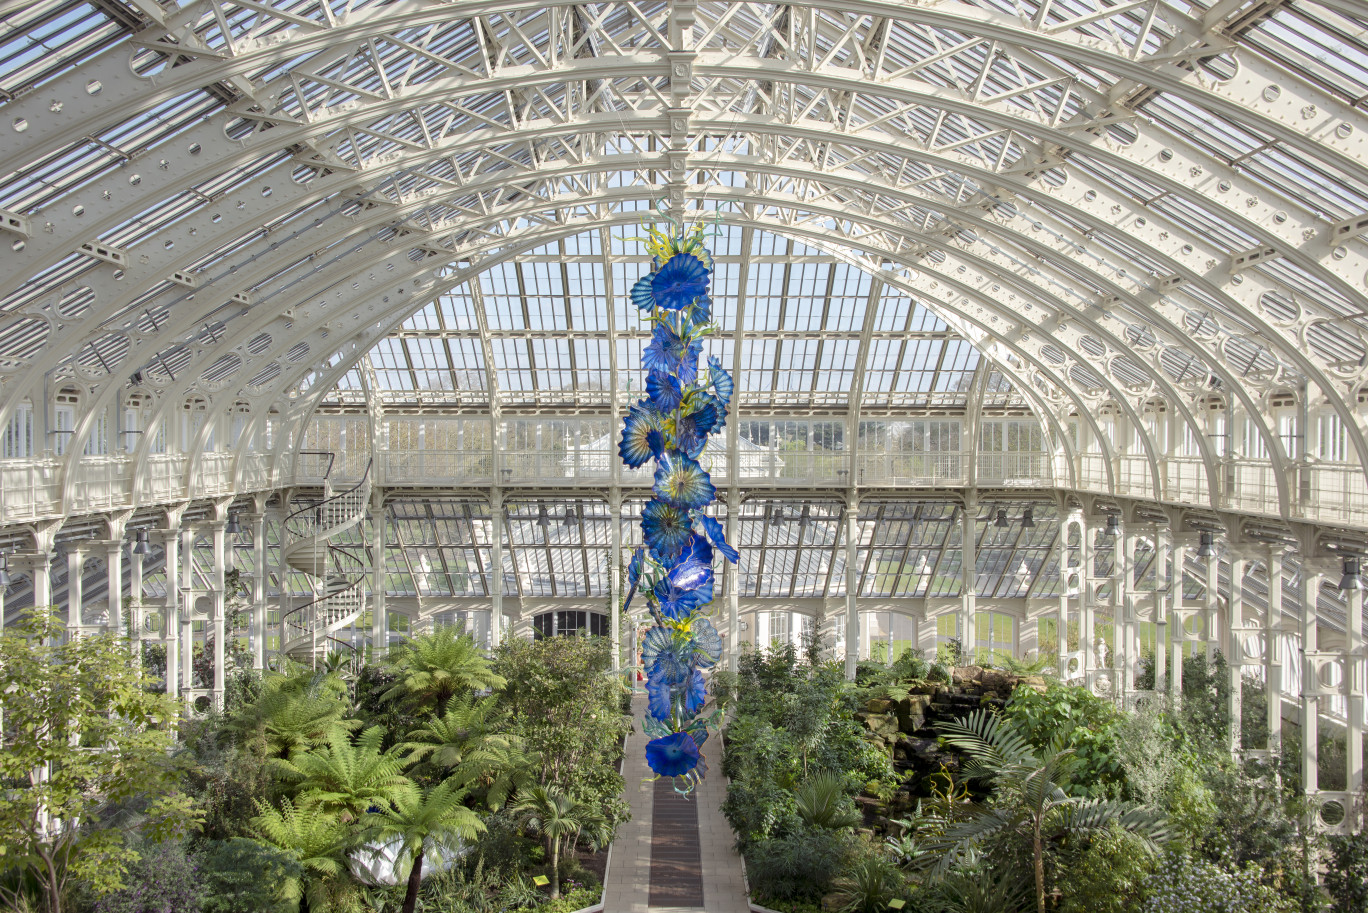 Dale Chihuly, Temperate House Persians, 2018 and Yellow Herons and Reeds, 2007-13, © Royal Botanic Gardens, Kew, London, installed 2019